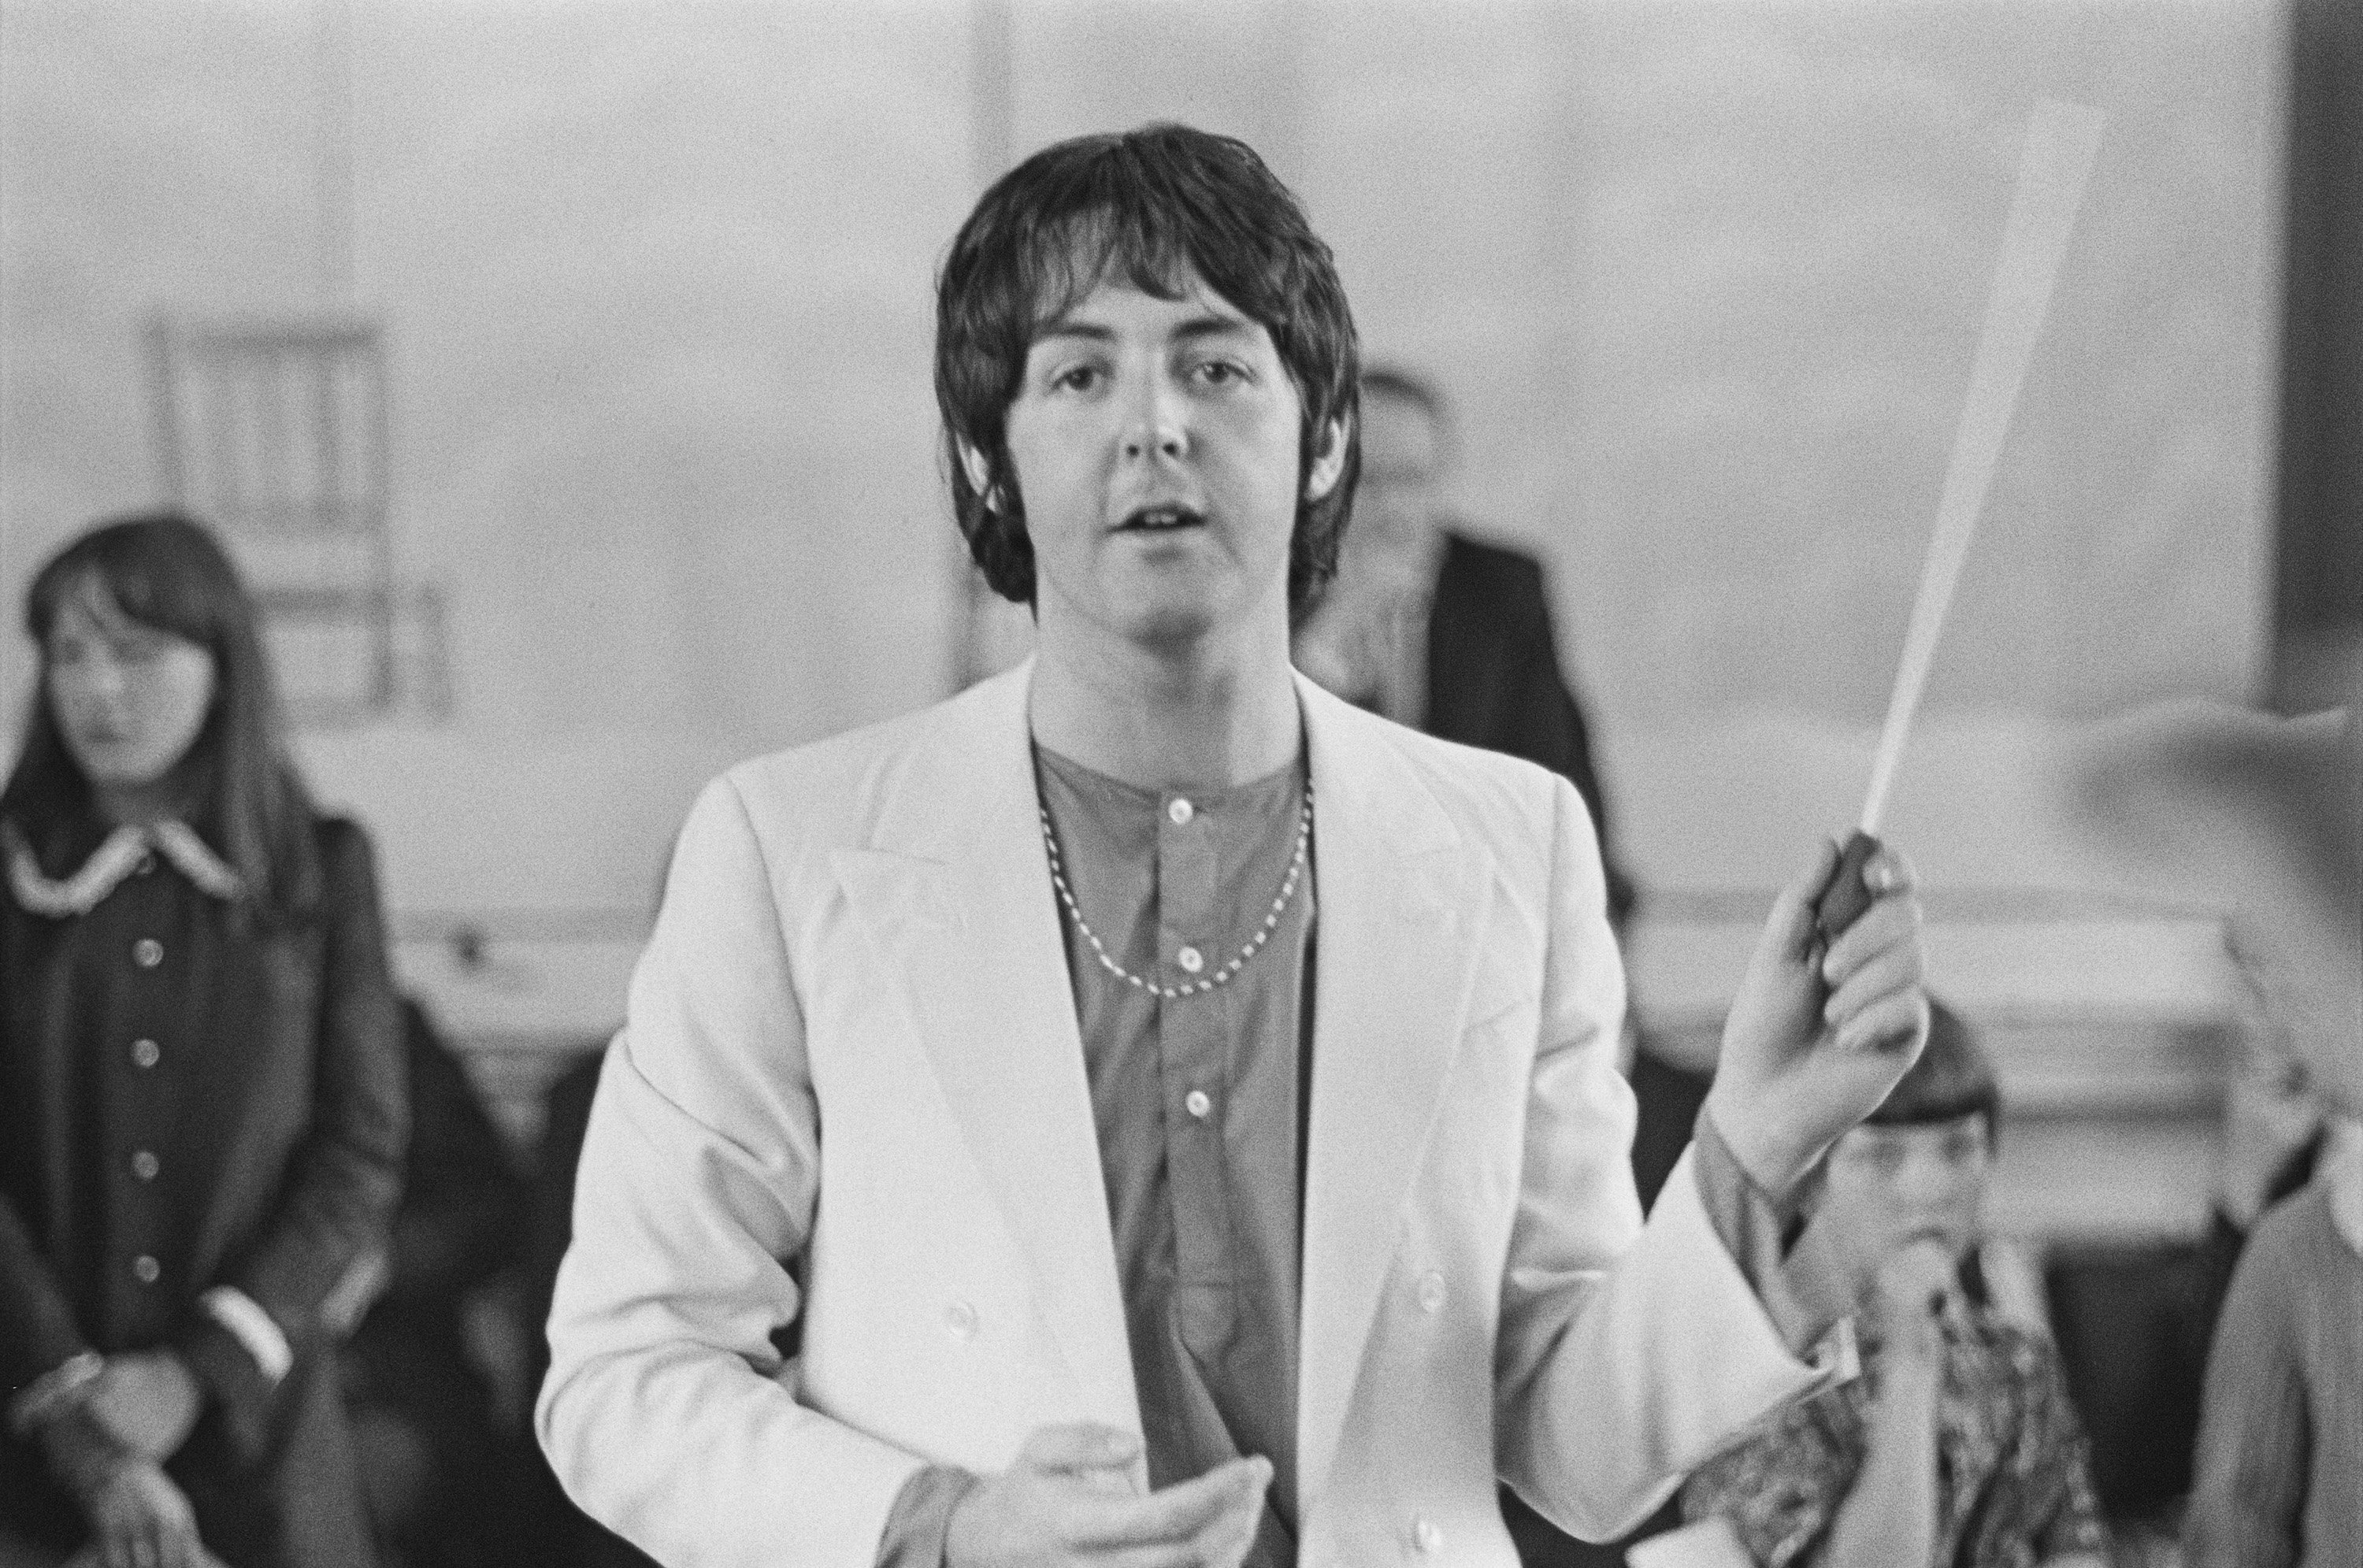 The Beatles' Paul McCartney records the Lennon-McCartney composition 'Thingumybob' with the Black Dyke Mills Band